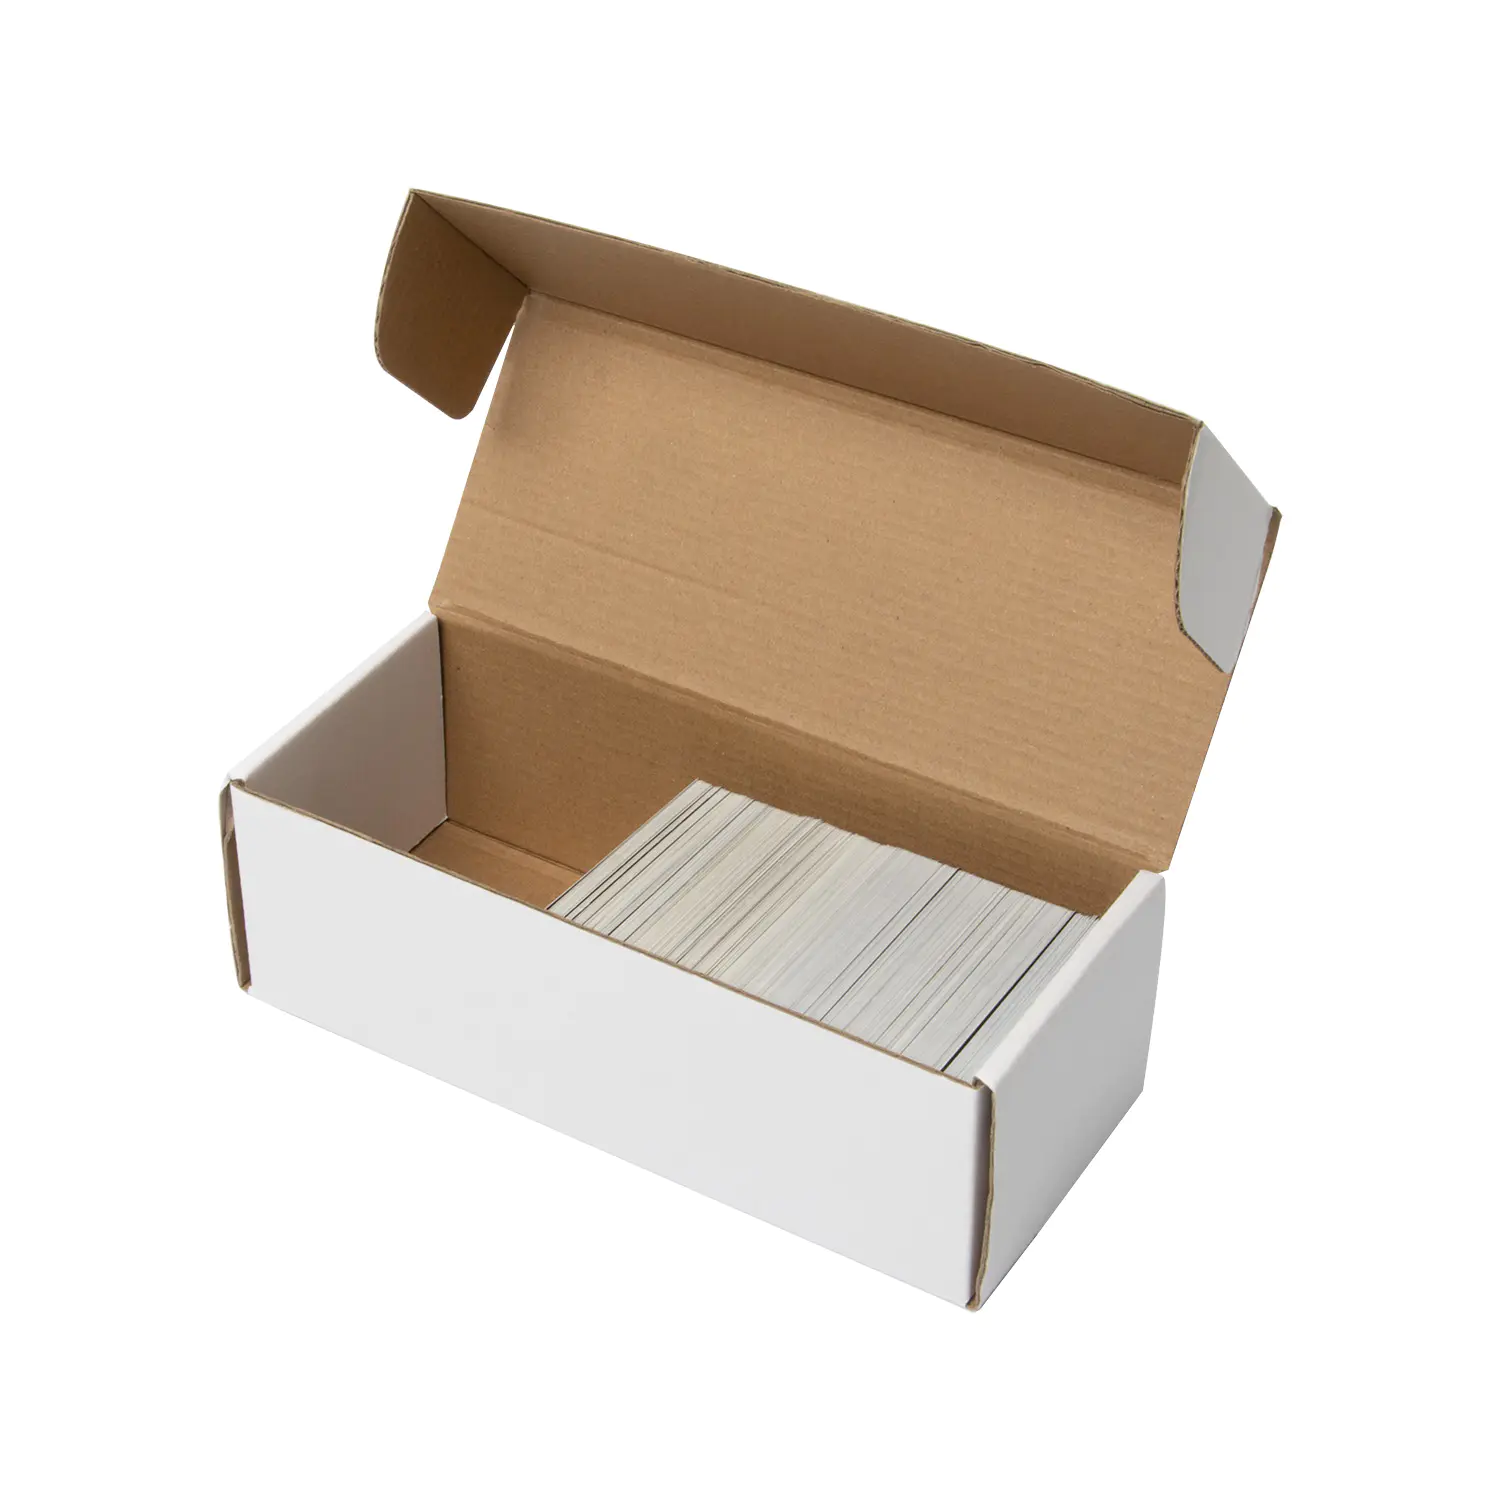 Trading Card Storage Box - 550 Count